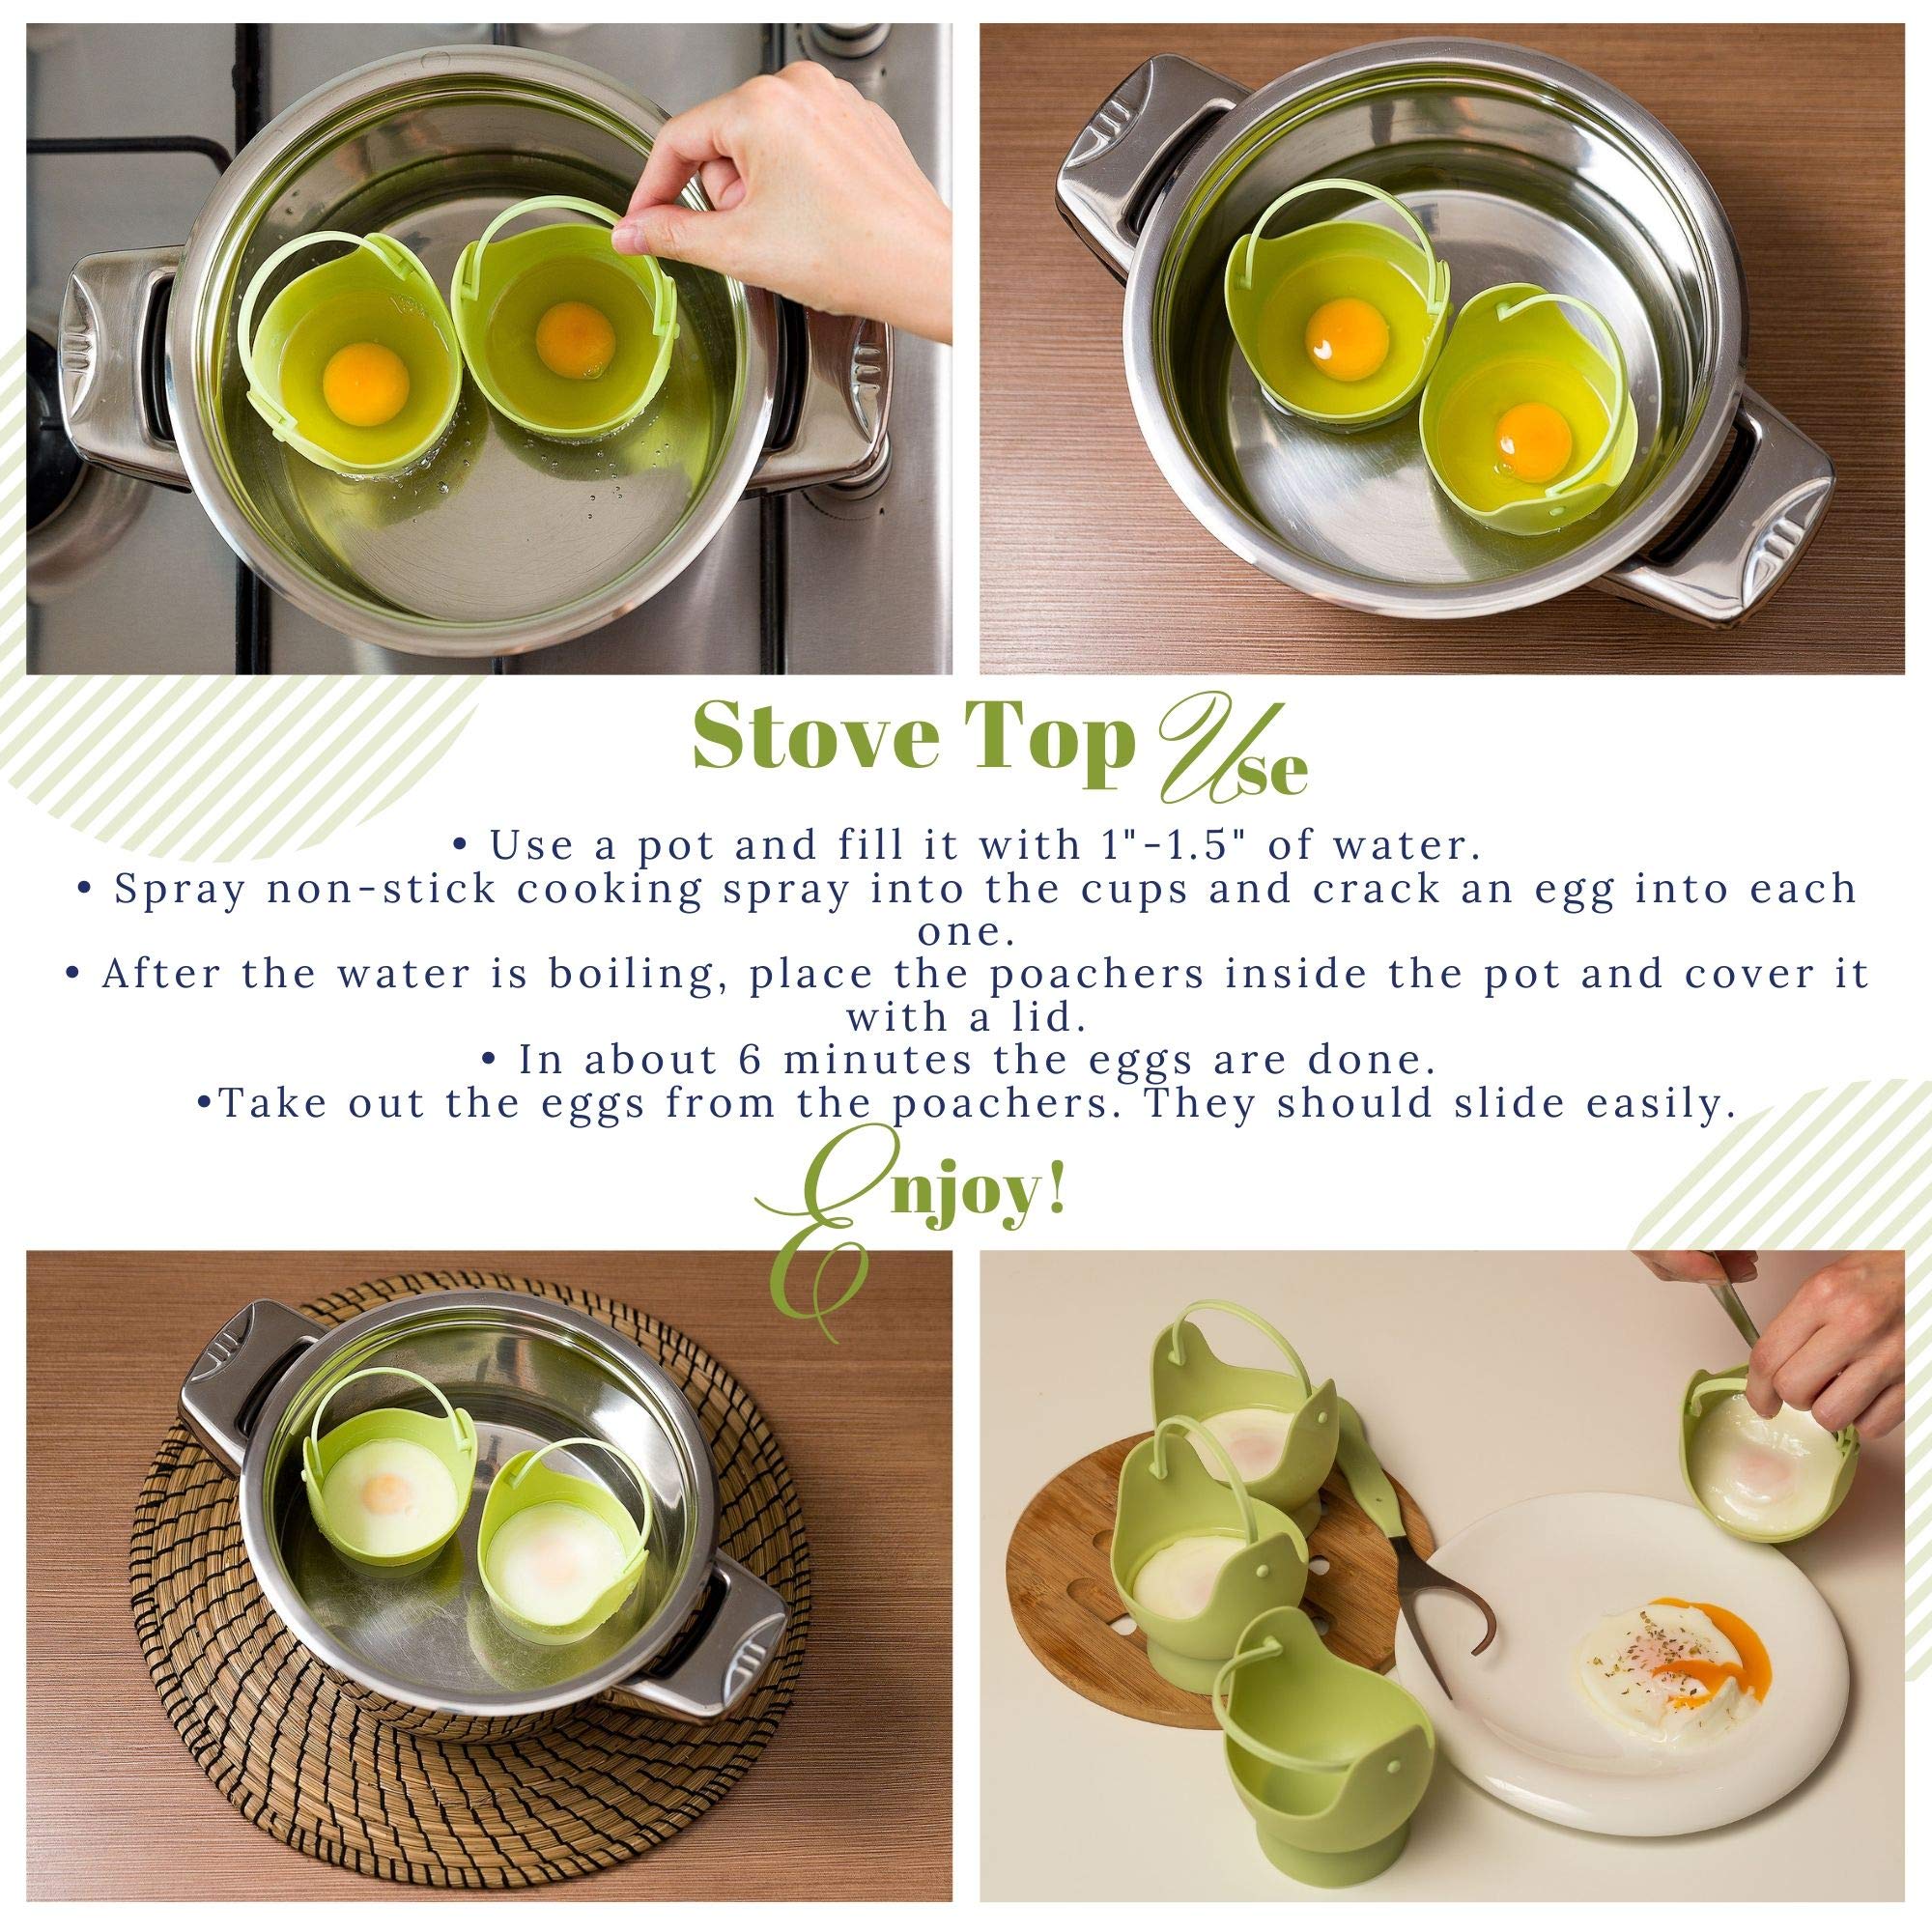 Egg Poacher - Skoo Silicone Egg Poaching Cups + Lids + Bonus eBook - Egg Cooker Set - Perfect Poached Egg Maker - For Stove Top, Microwave and Instant Pot - Pack of 2 - Green